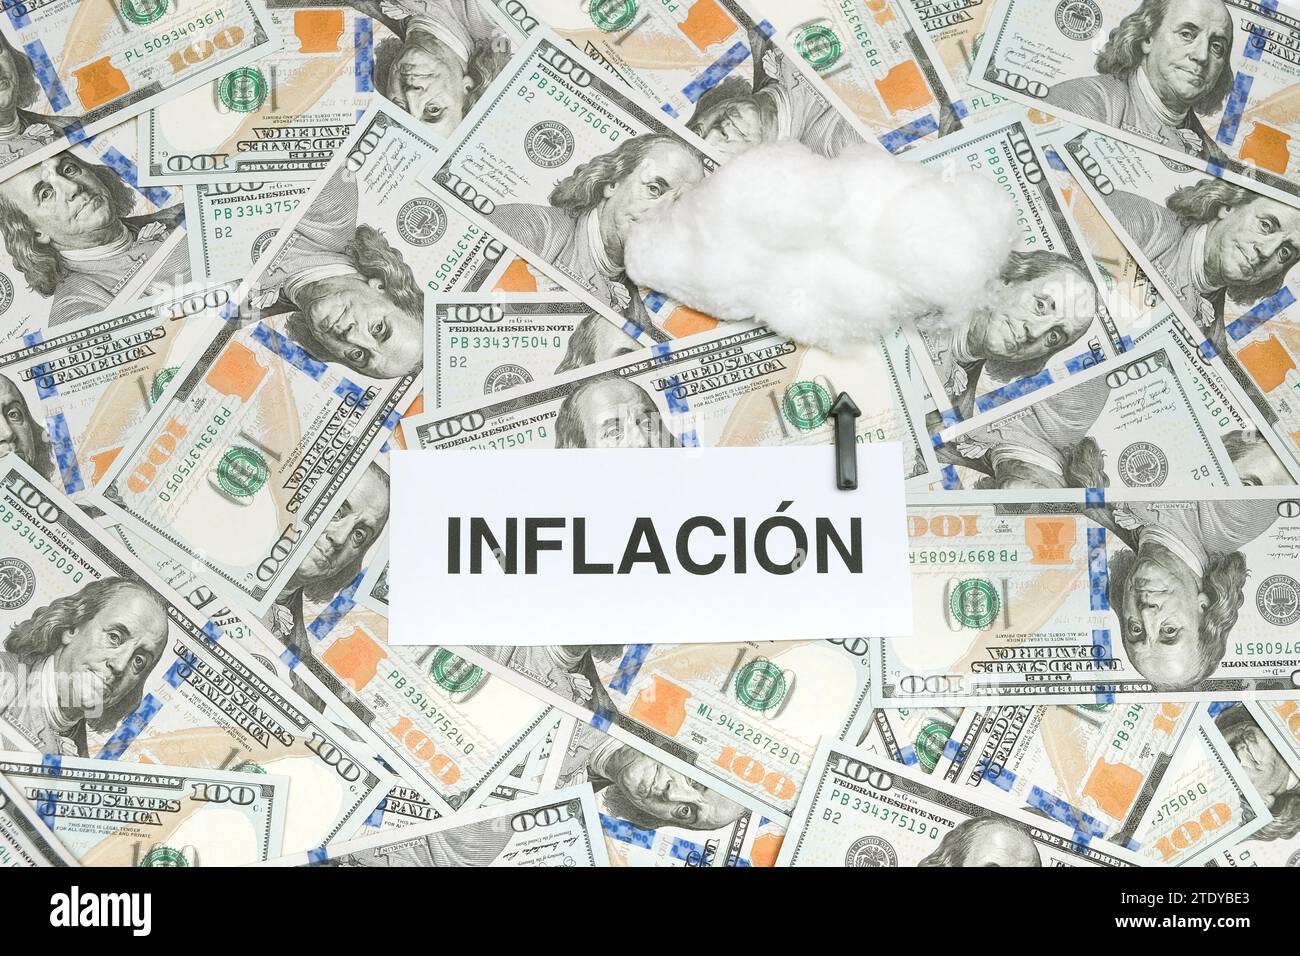 Spanish Word 'Inflación' Written On A Paper And An Arrow Pointing To A Cloud meaning Inflation Skyrocketed As A Result Of The Economic Crisis Stock Photo